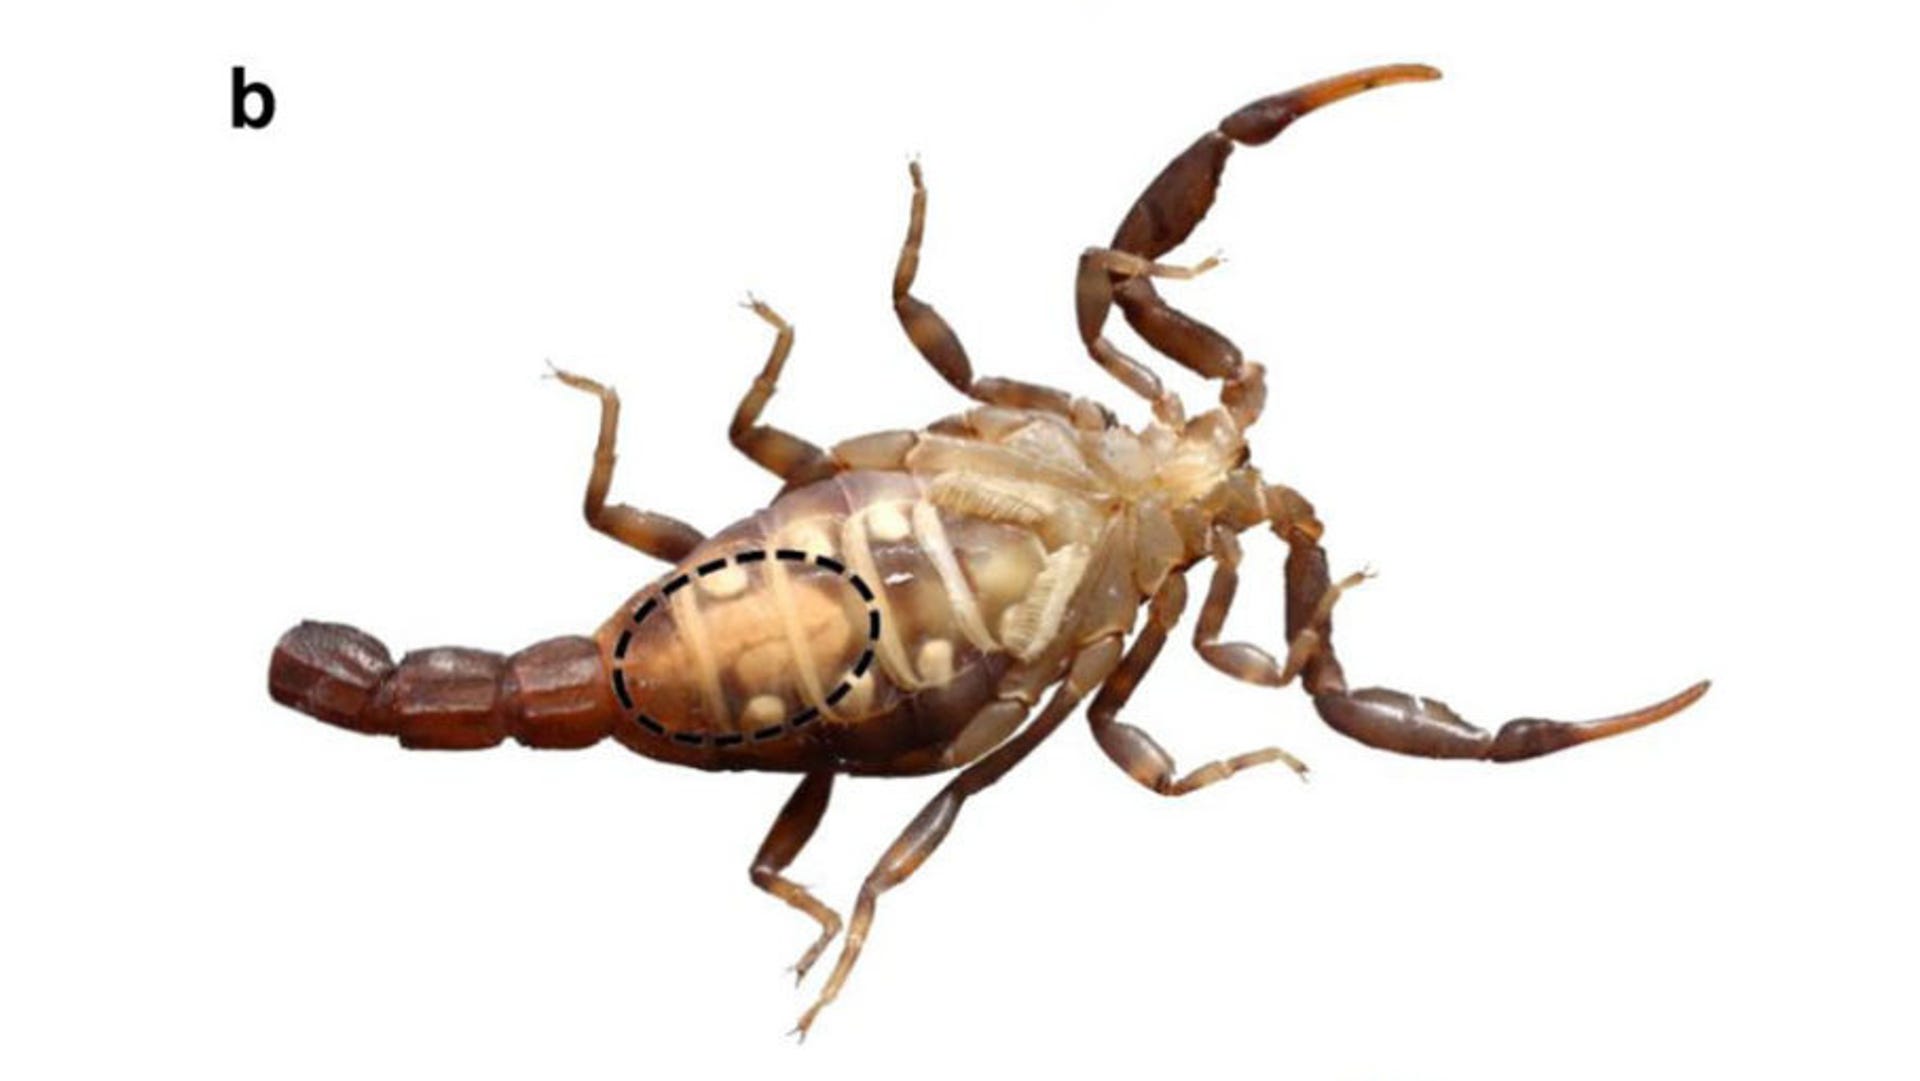 A scorpion underside showing it missing part of its tail along with its constipated area circled.